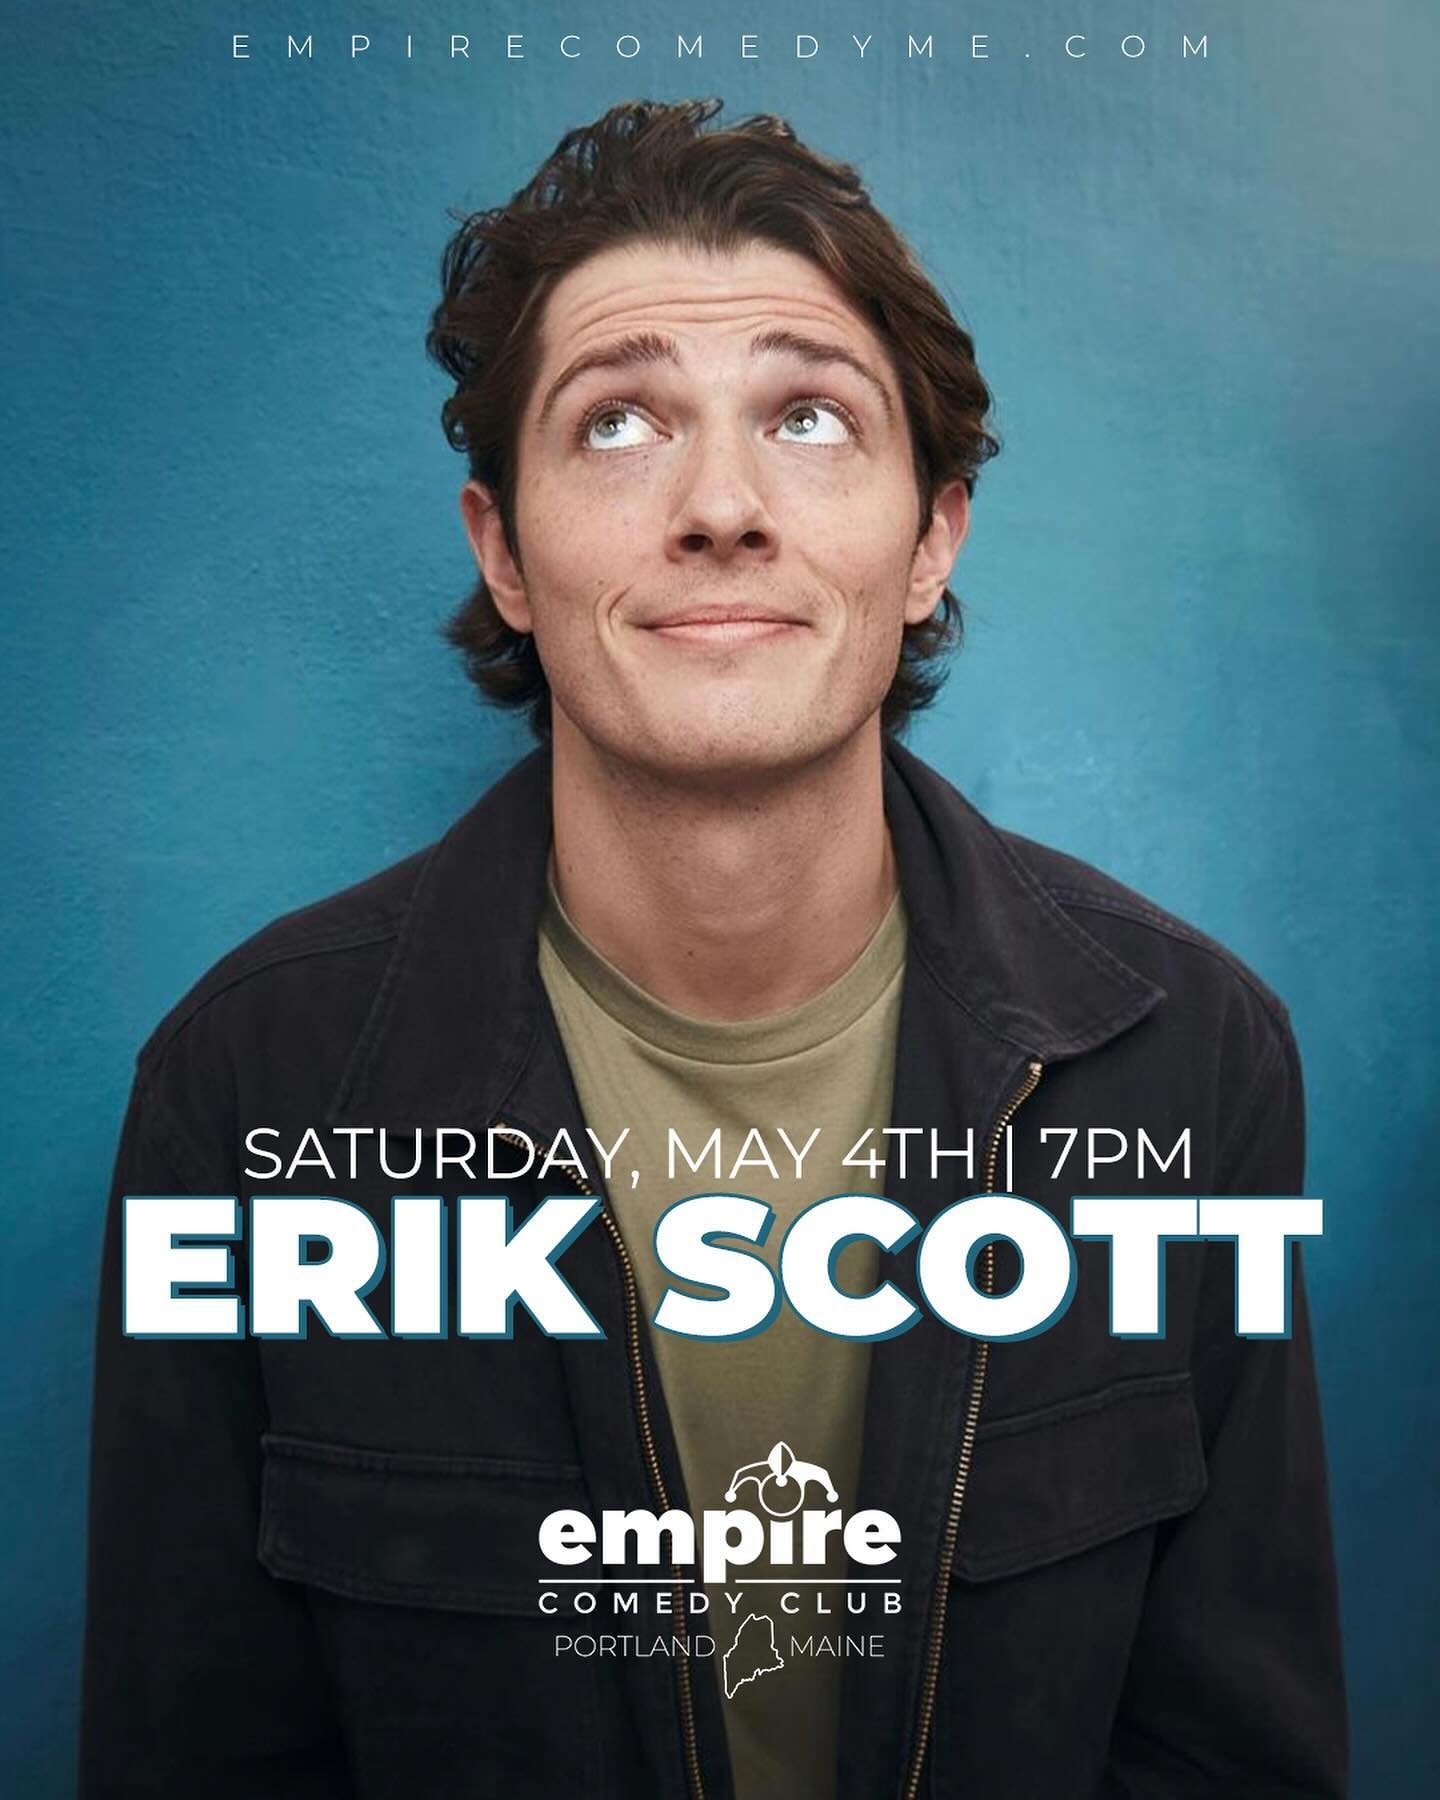 SATURDAY 5/4! Two shows tonight! Erik Scott (NYC) headlines the 7pm show, followed by our Last Call Showcase at 9:30!  Get those tickets! 
*tix to first show get free entry to late show*
&bull;
#empirecomedyclub #comedyclub #maine #portlandmaine #thi